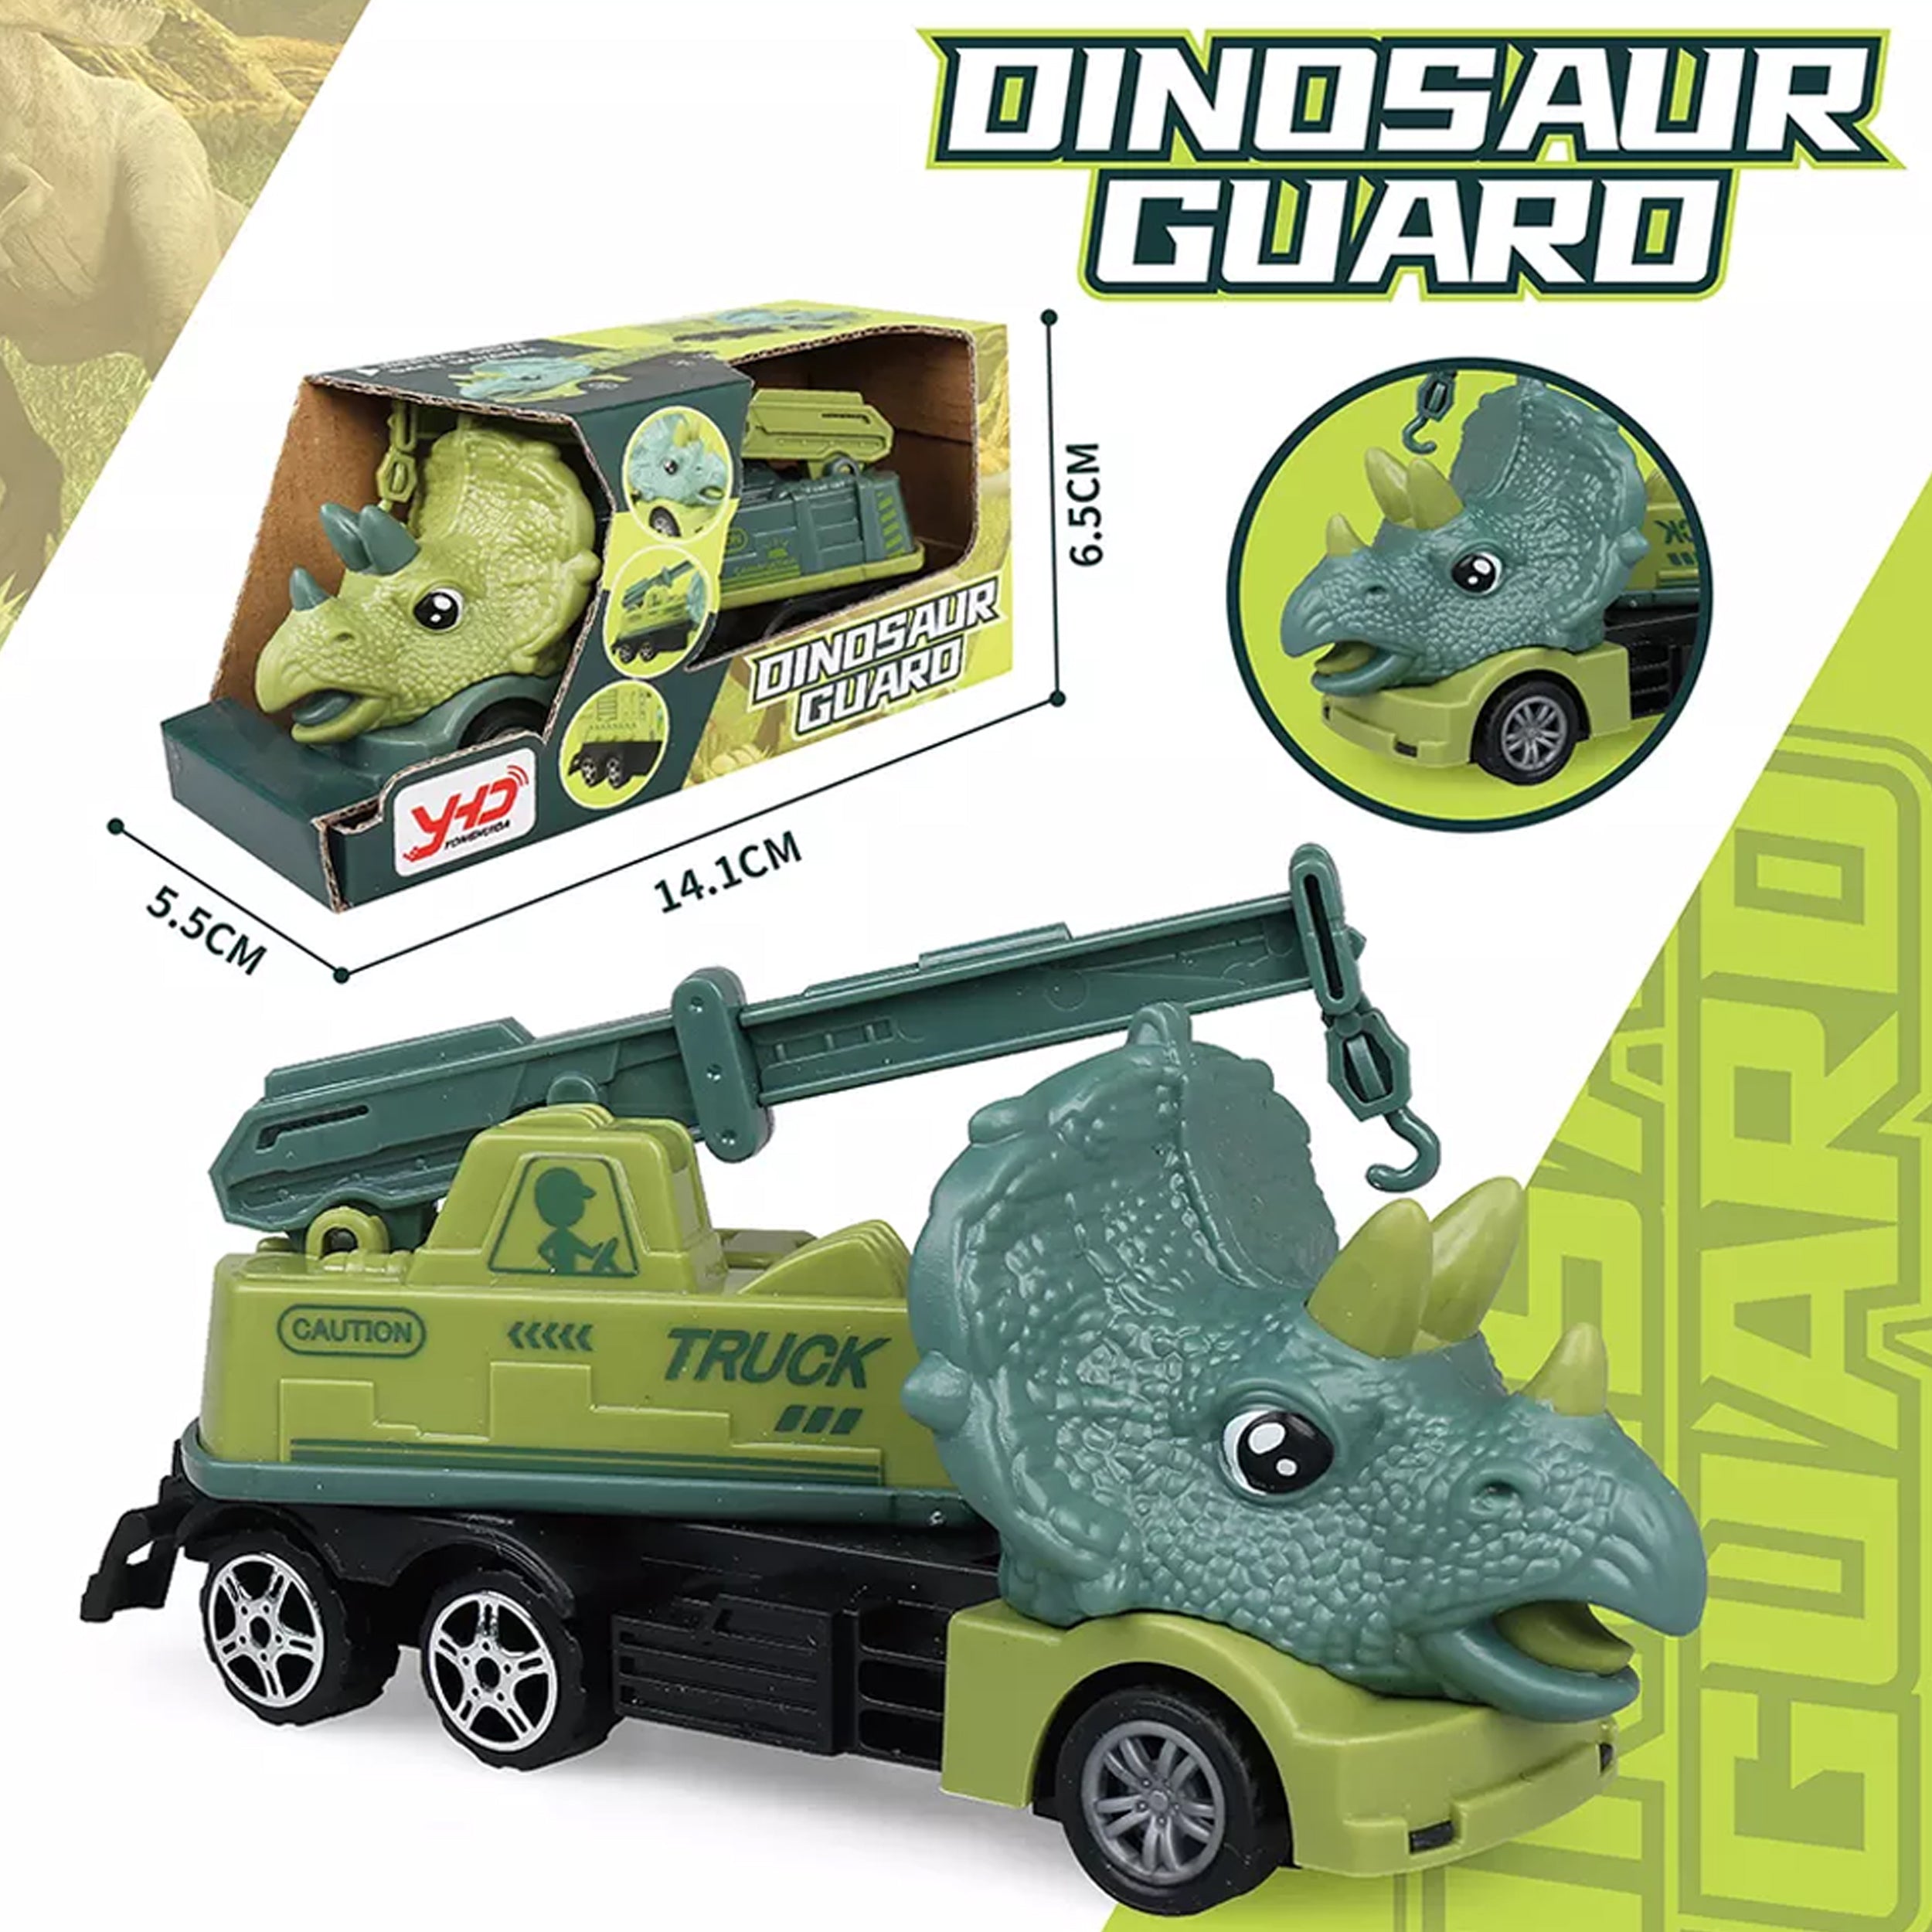 Dinosaur Engineering Transport Vehicle Toy Car - Let Your Child Explore the Prehistoric World with Fun and Engaging Dino-Car Toys